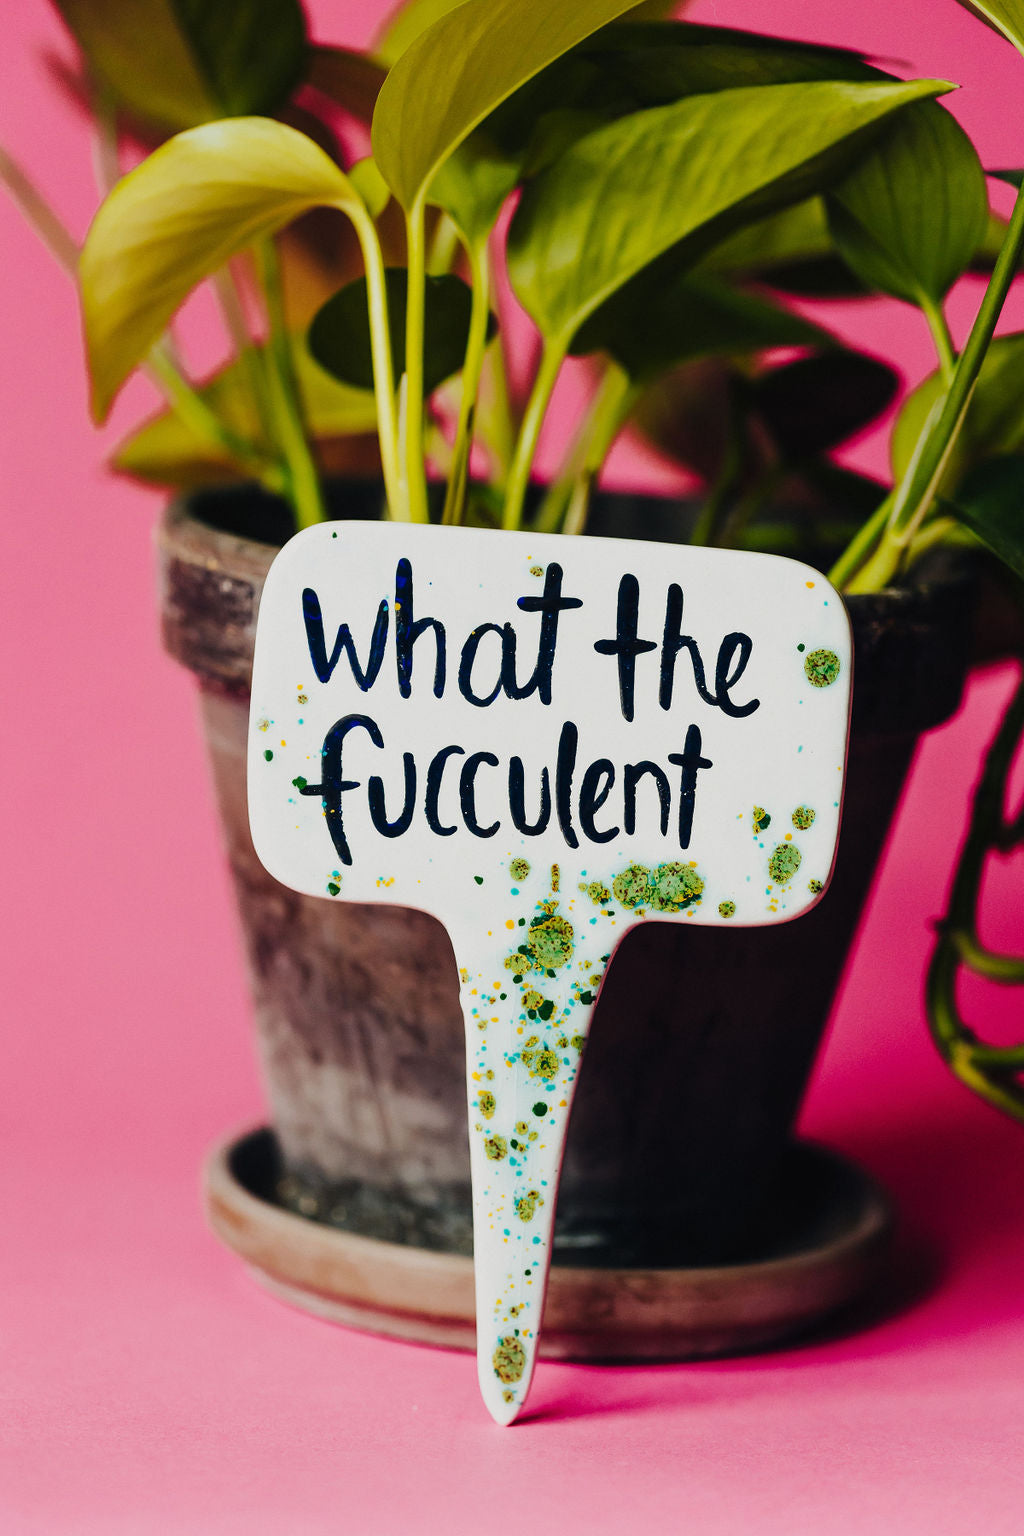 What the Fucculent Funny Punny Garden Plant Stake